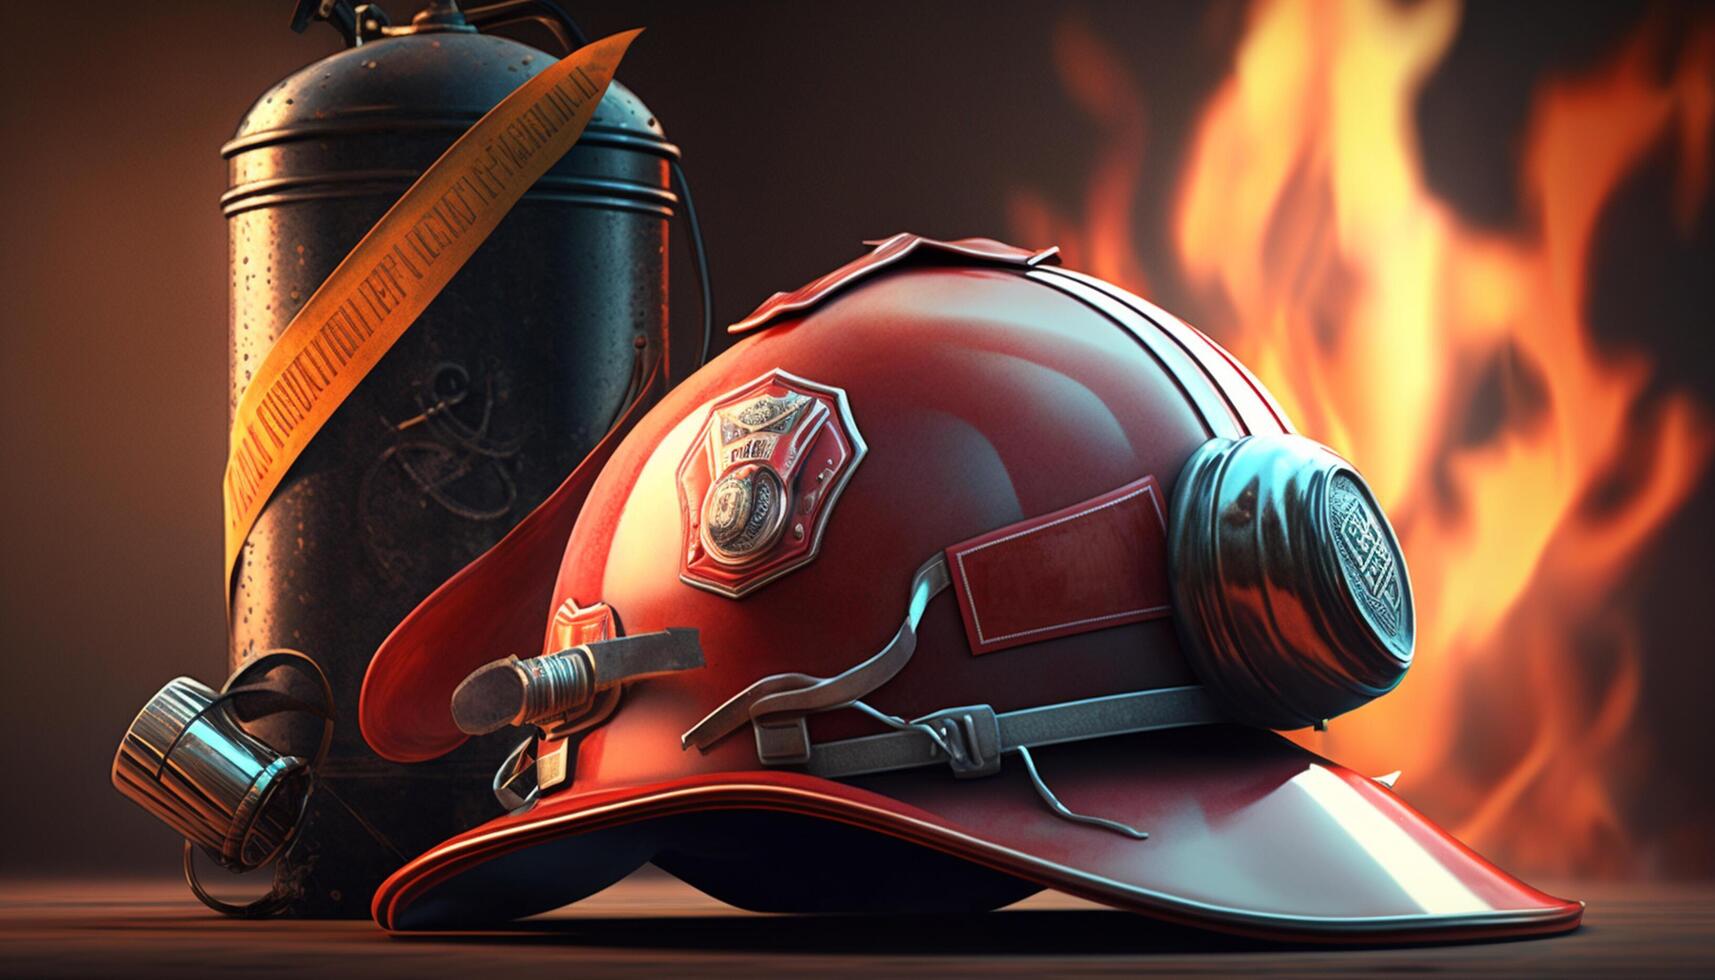 Fire Extinguisher and Firefighter Helmet with Flames in Background - Essential Safety Gear in Action photo